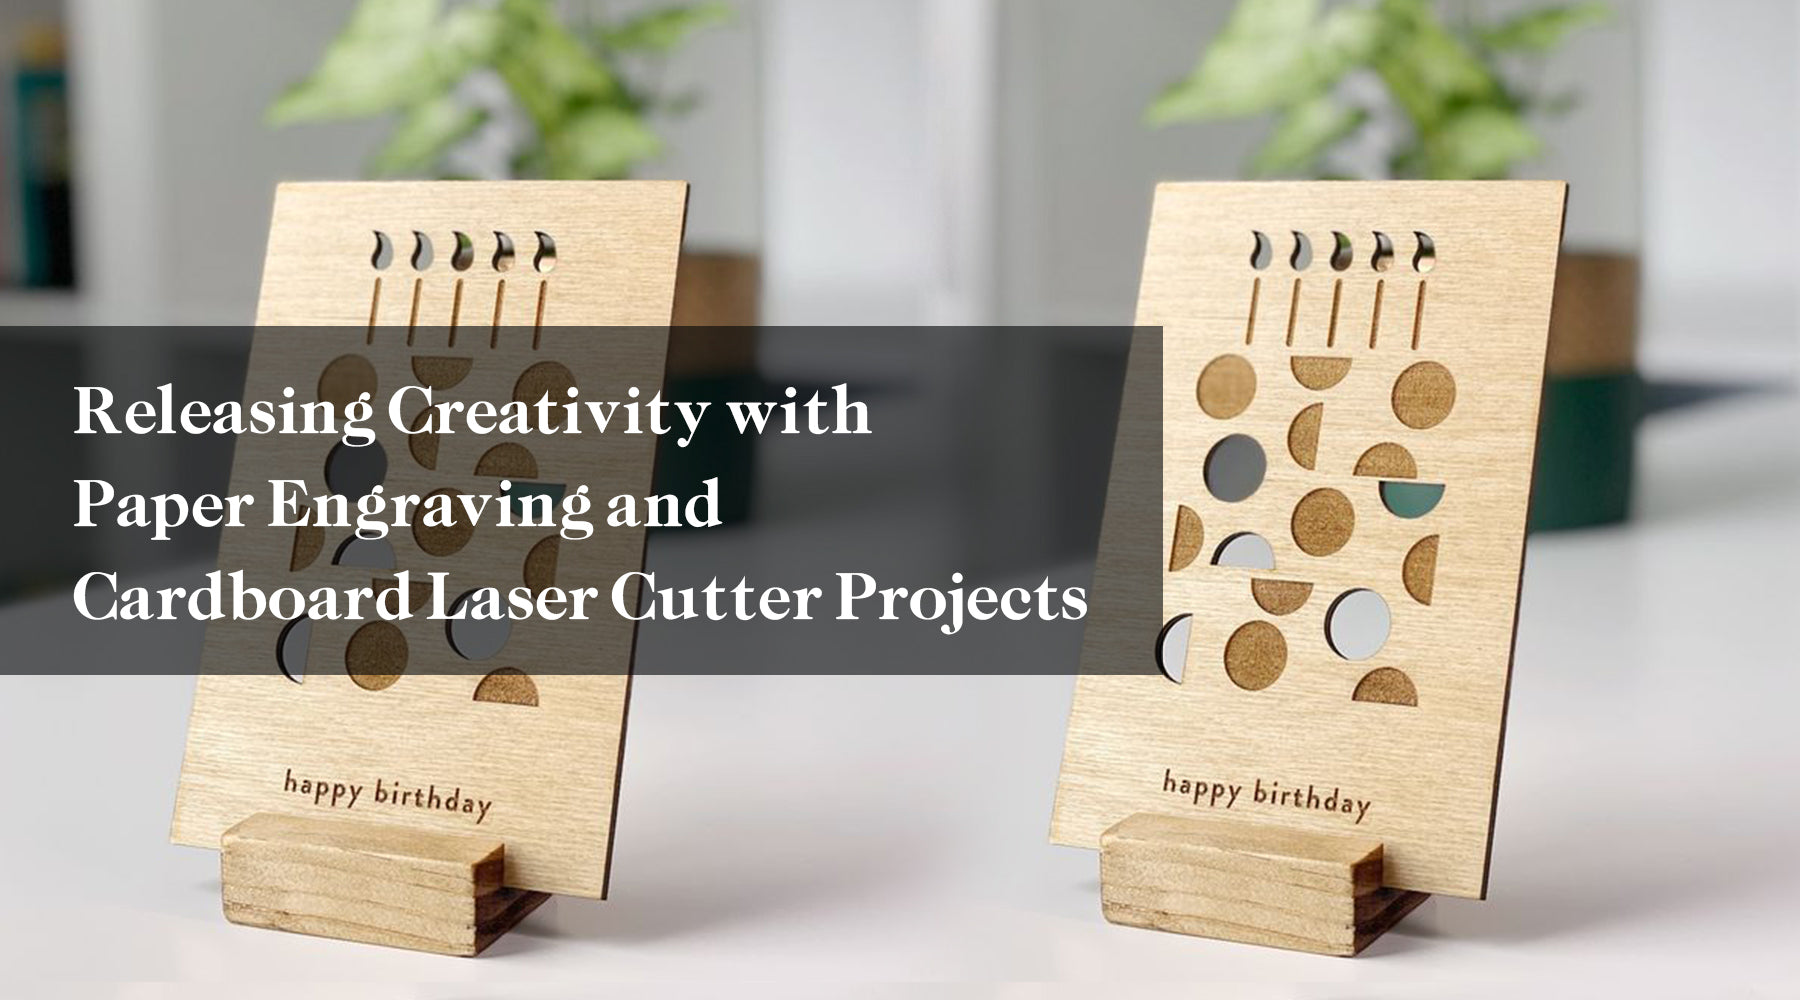 Releasing Creativity with Paper Engraving and Cardboard Laser Cutter Projects